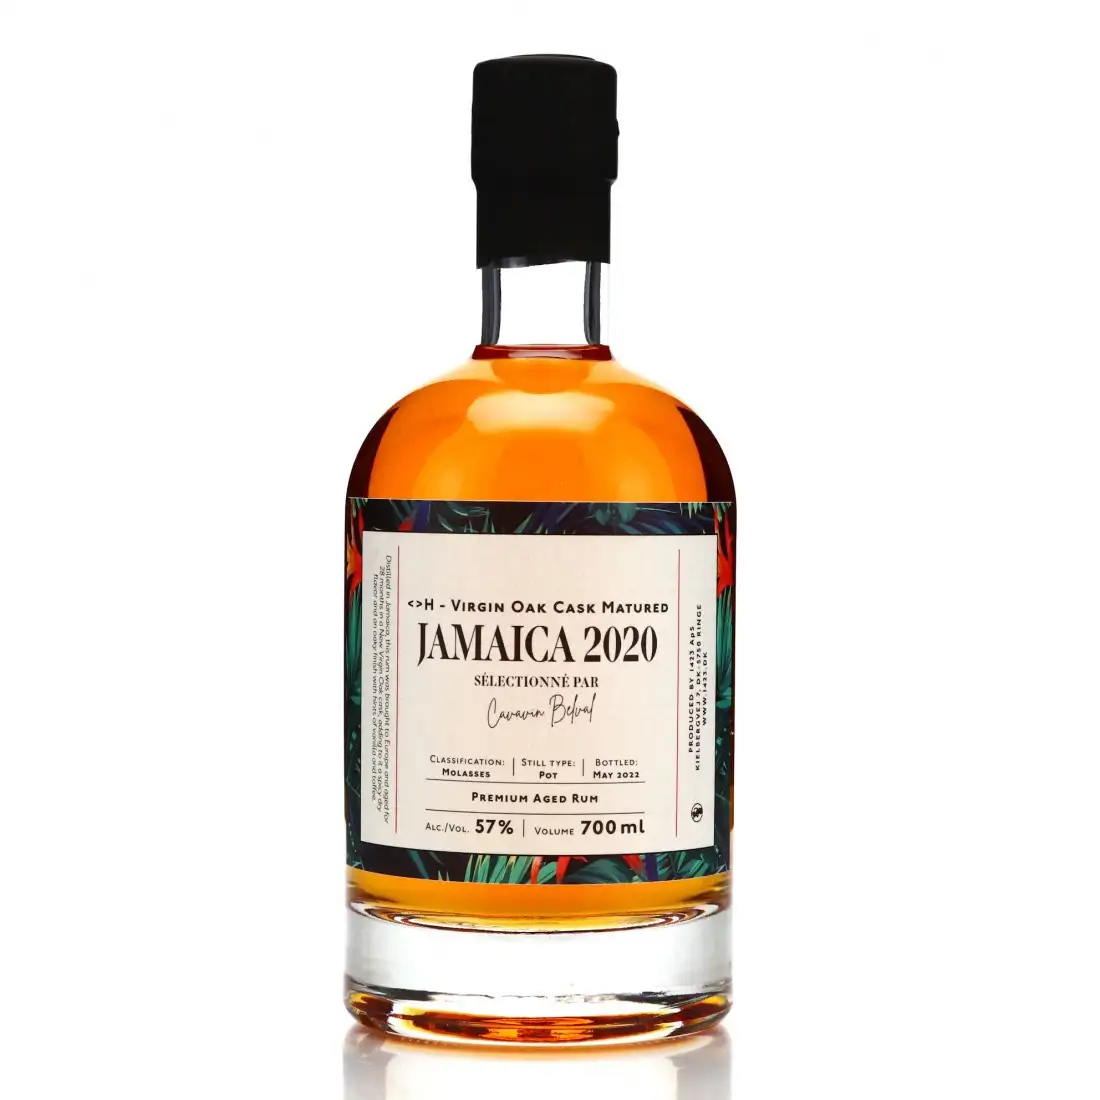 Image of the front of the bottle of the rum Jamaica 2020 <>H Virgin Oak Cask Matured (Cavavin Belval) <>H